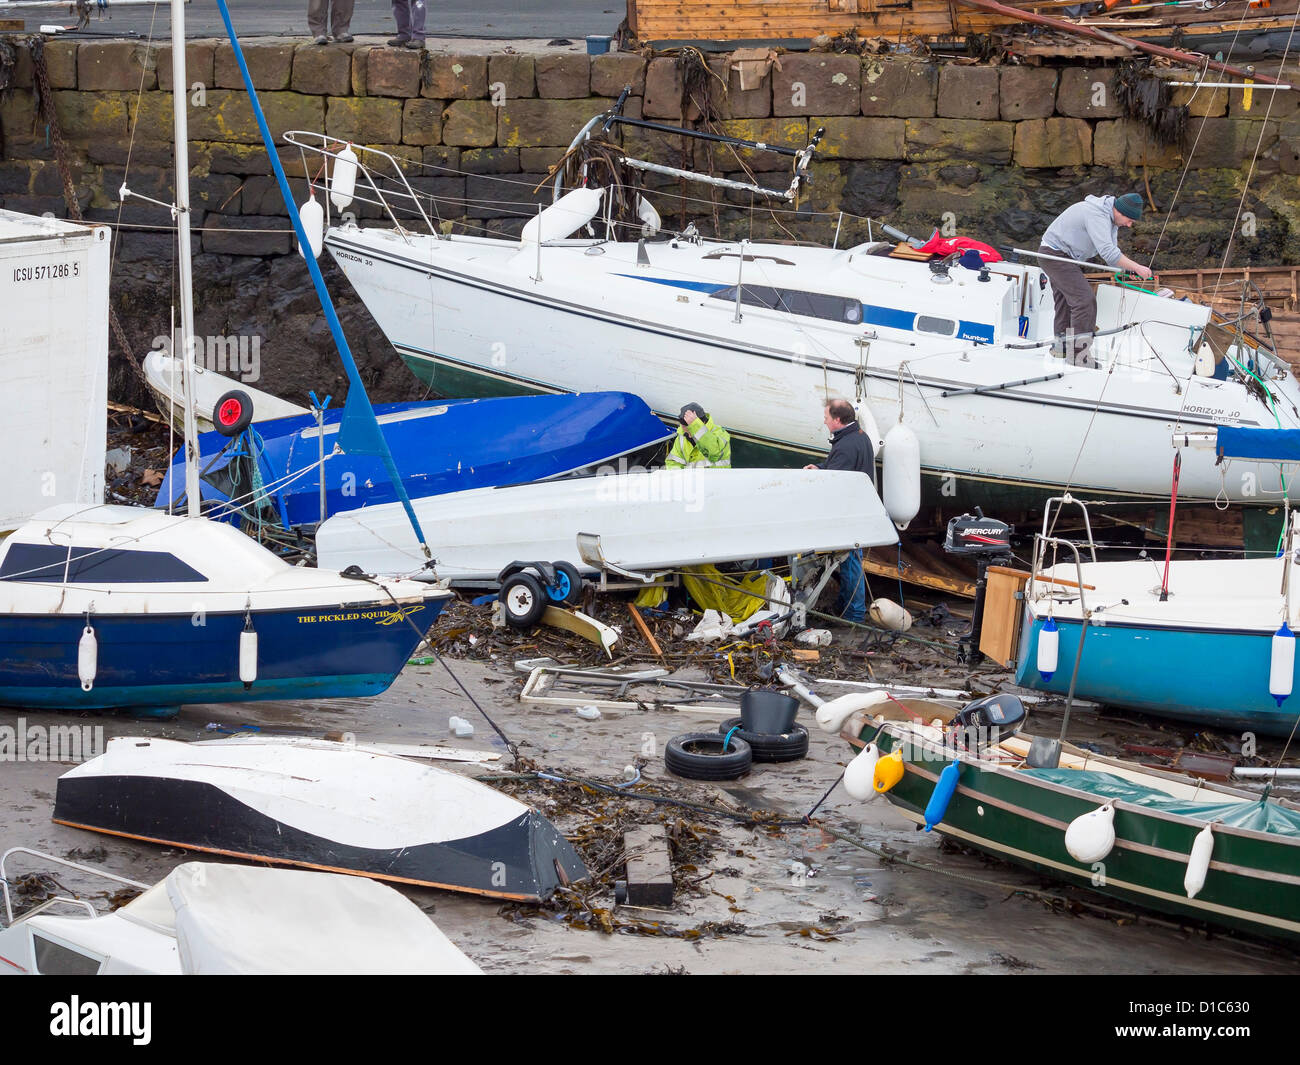 North Berwick, Scotland, UK. 15th December 2012. Storm damage in the old harbour of the fishing village. A major storm swept in overnight from the North Sea and 20 foot waves broke over the seawall, sending a 40 foot refrigerated container that was parked in the carpark into the harbour, smashing many boats and yachts, causing tens of thousands of pounds of damage. Luckily no one was hurt. Credit:  Bill Miller / Alamy Live News. Stock Photo